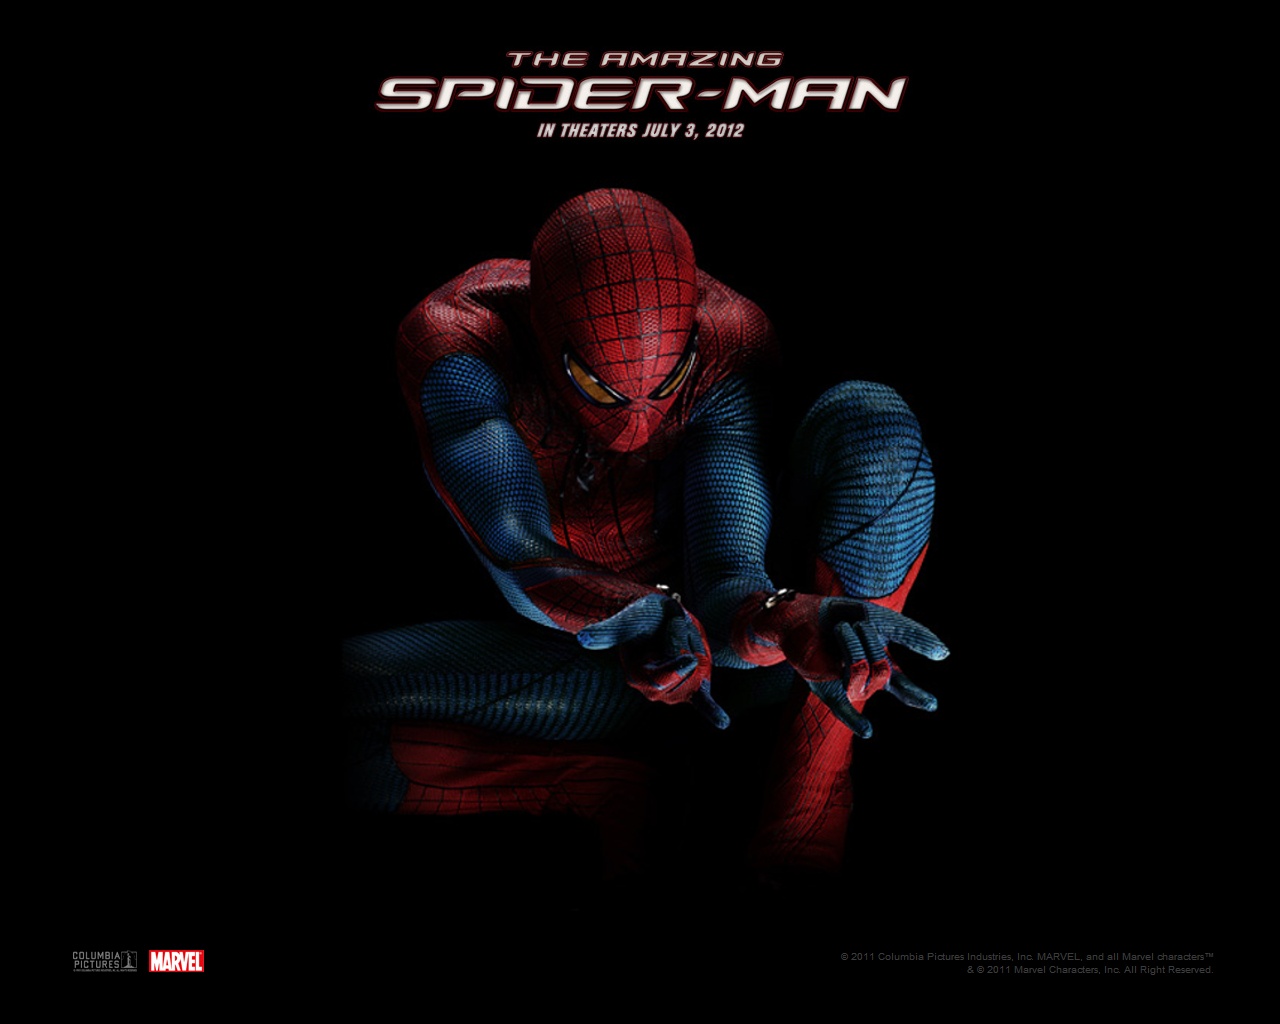 ... wallpapers | Hollywood movies wallpapers: The Amazing Spider-Man hd